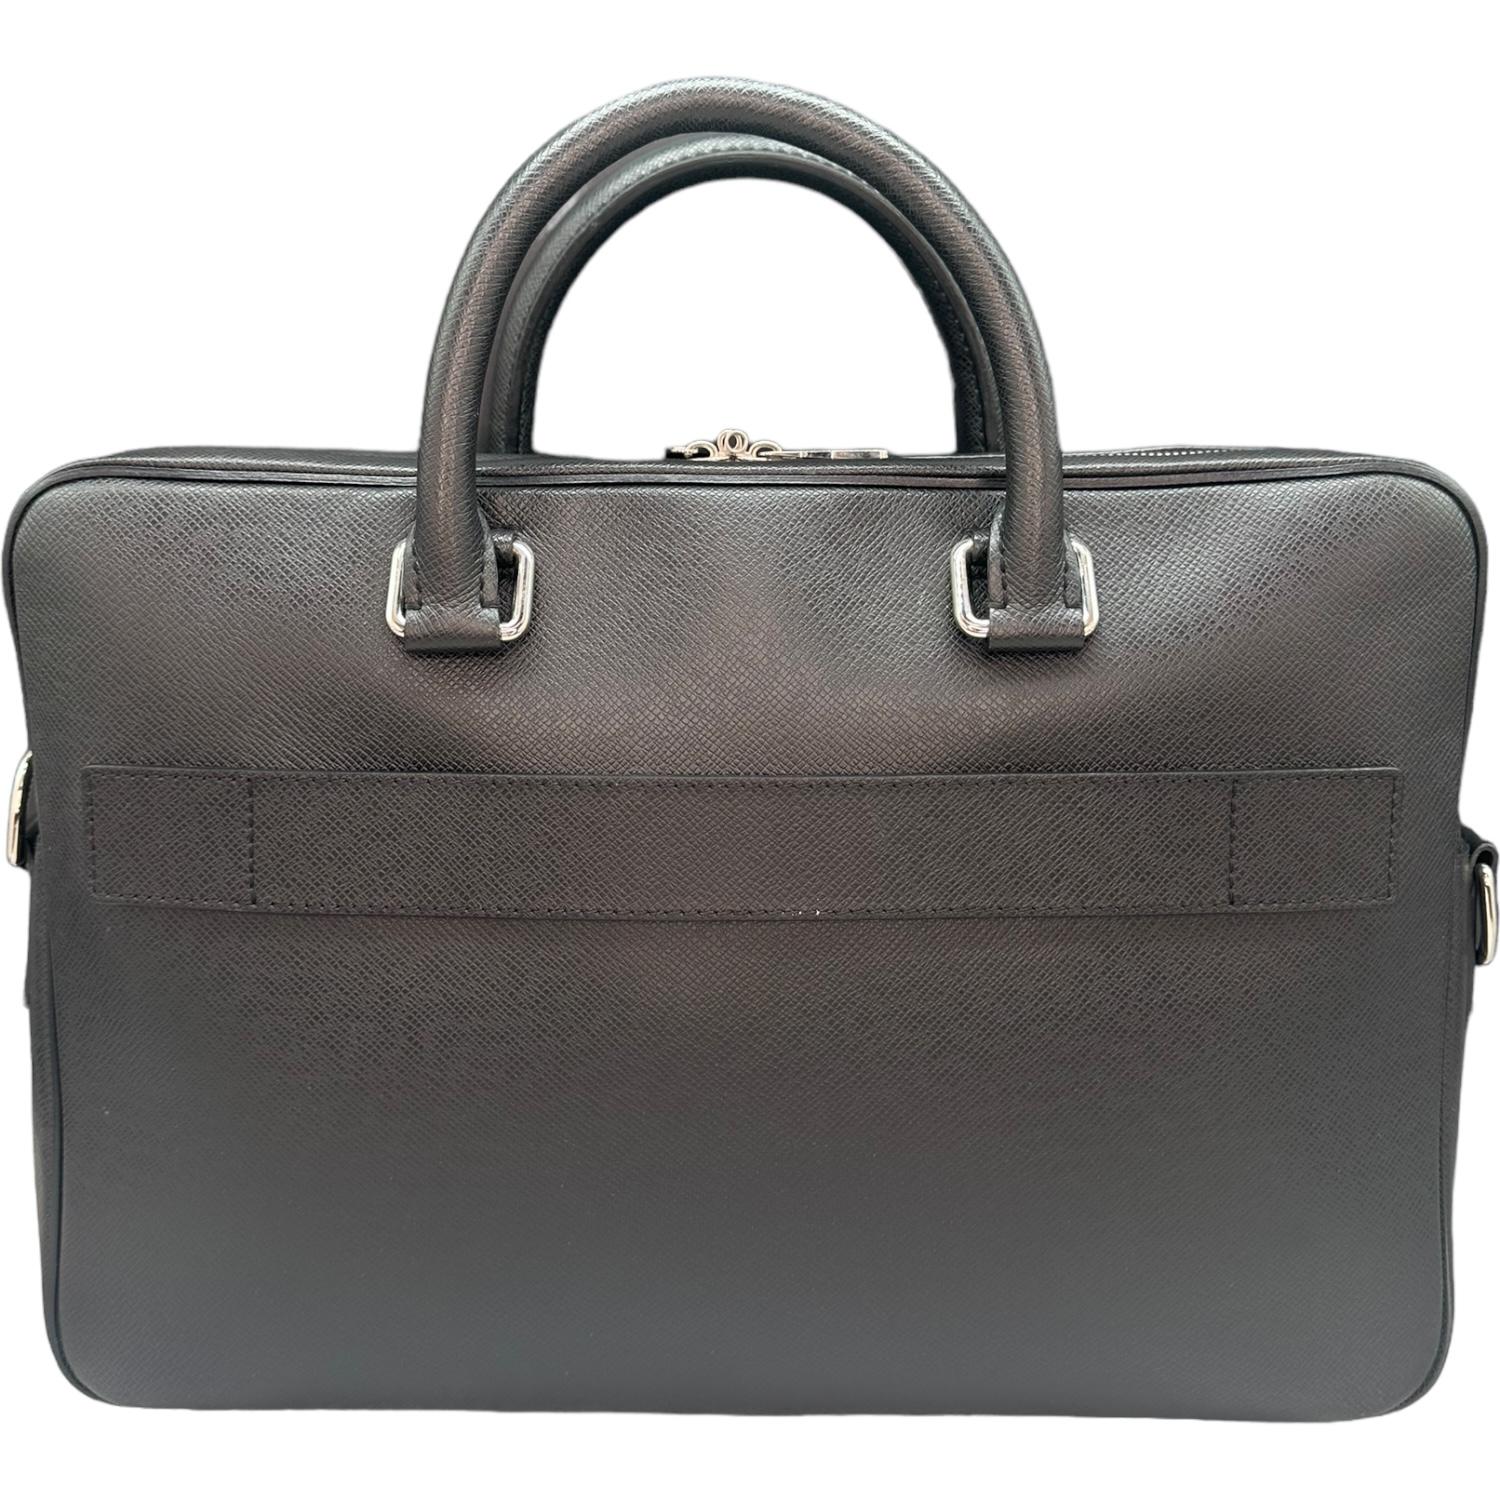 This Louis Vuitton Porto Document Business bag is finely crafted of black Louis Vuitton Taiga leather exterior with leather trimming and Gun metal-tone hardware. It has dual rolled leather top handles. It features a zip pocket on the front and a